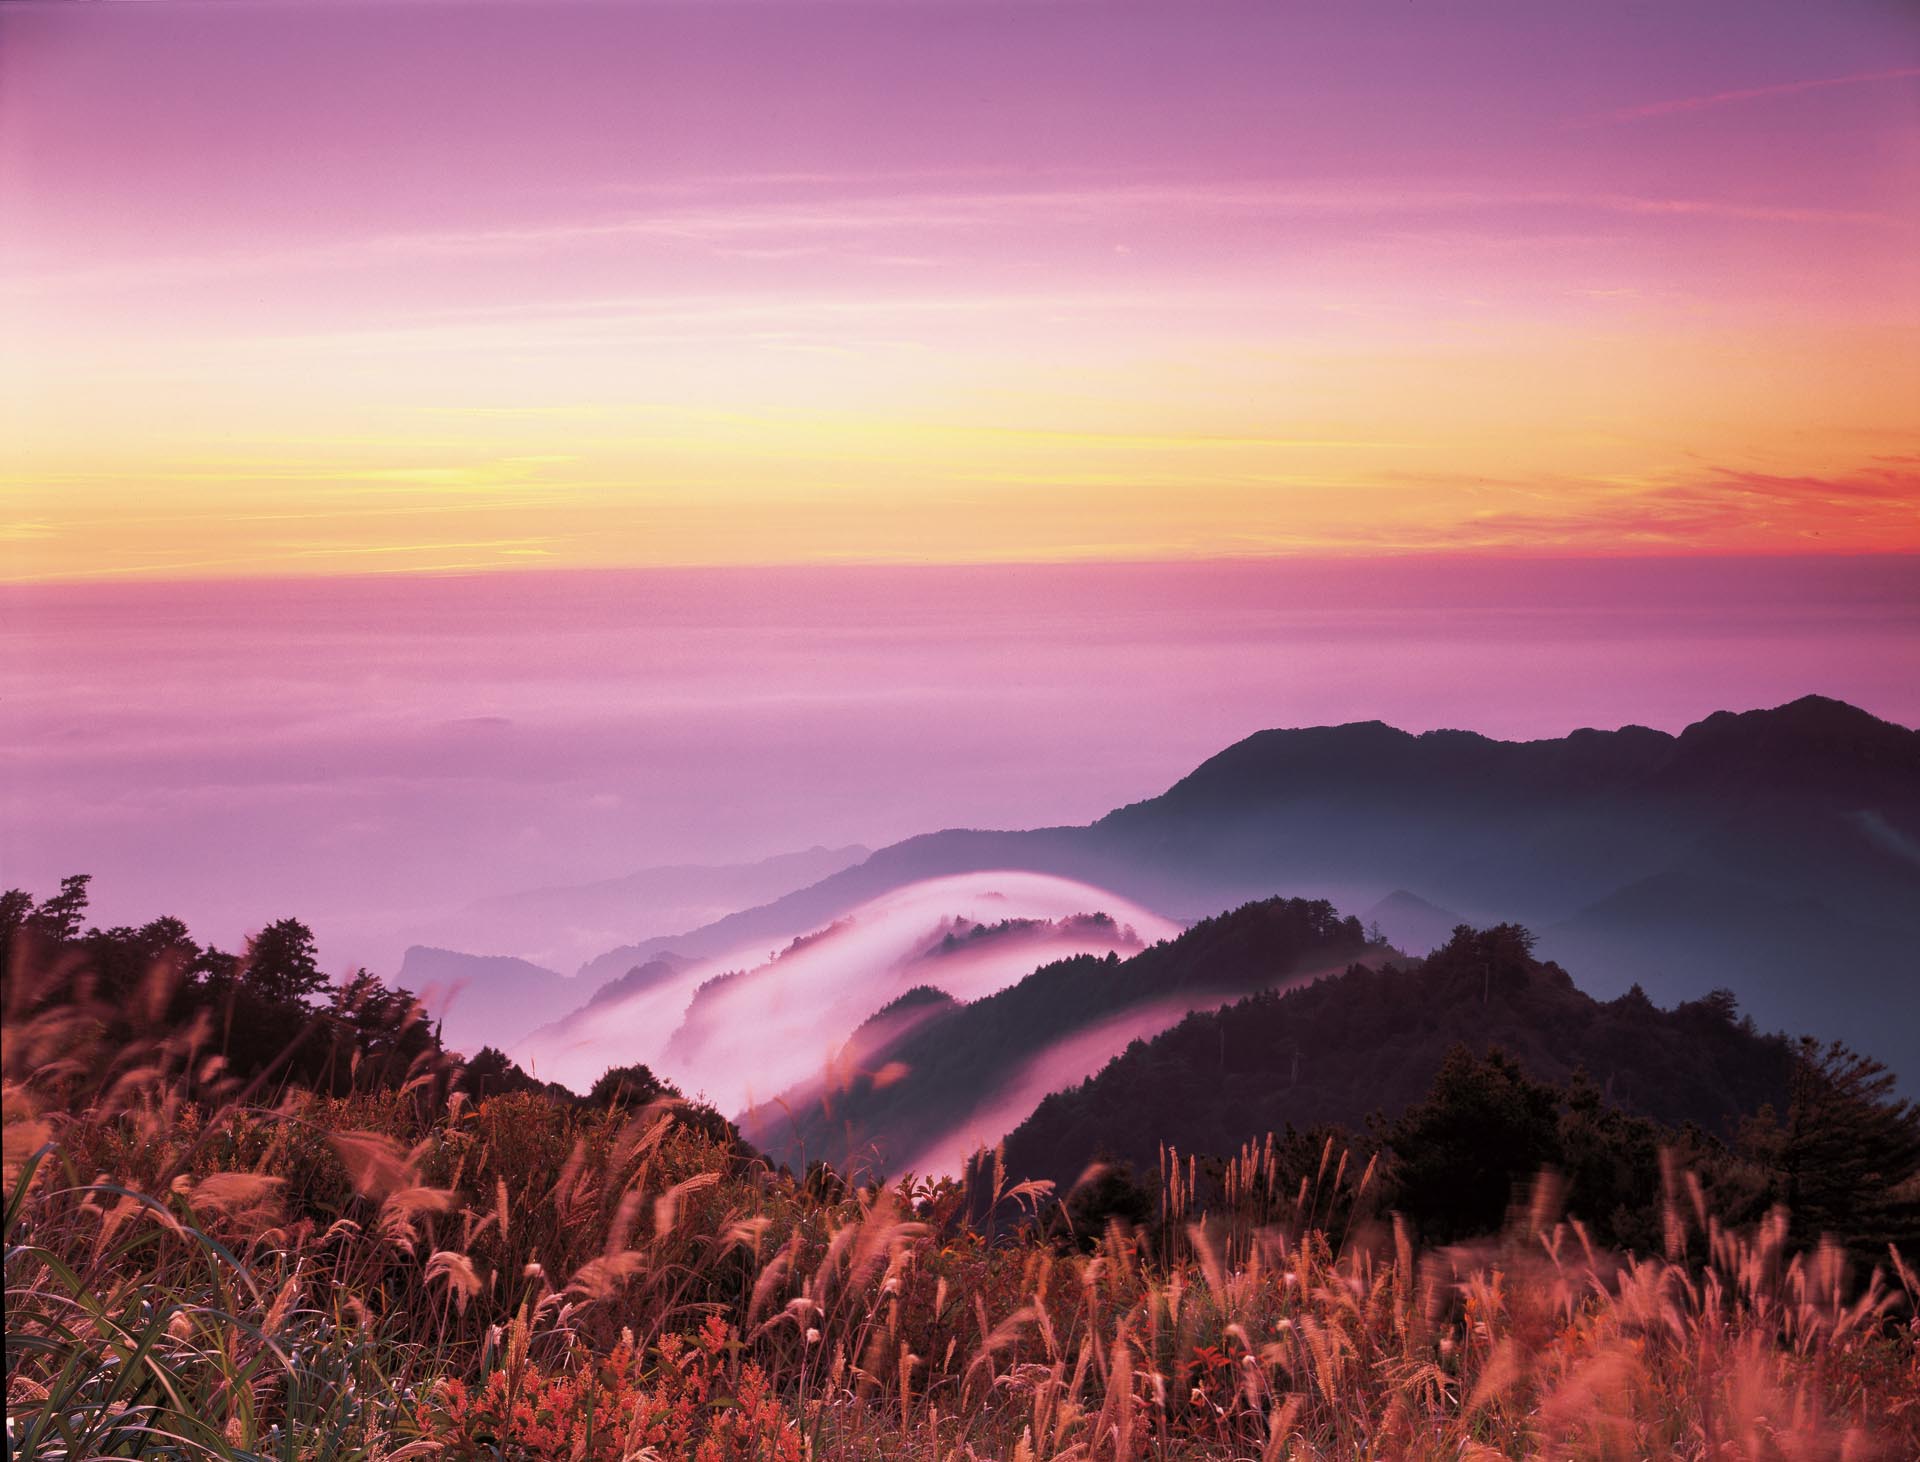 Seas of clouds and beautiful sunsets attract  visitors to the park.